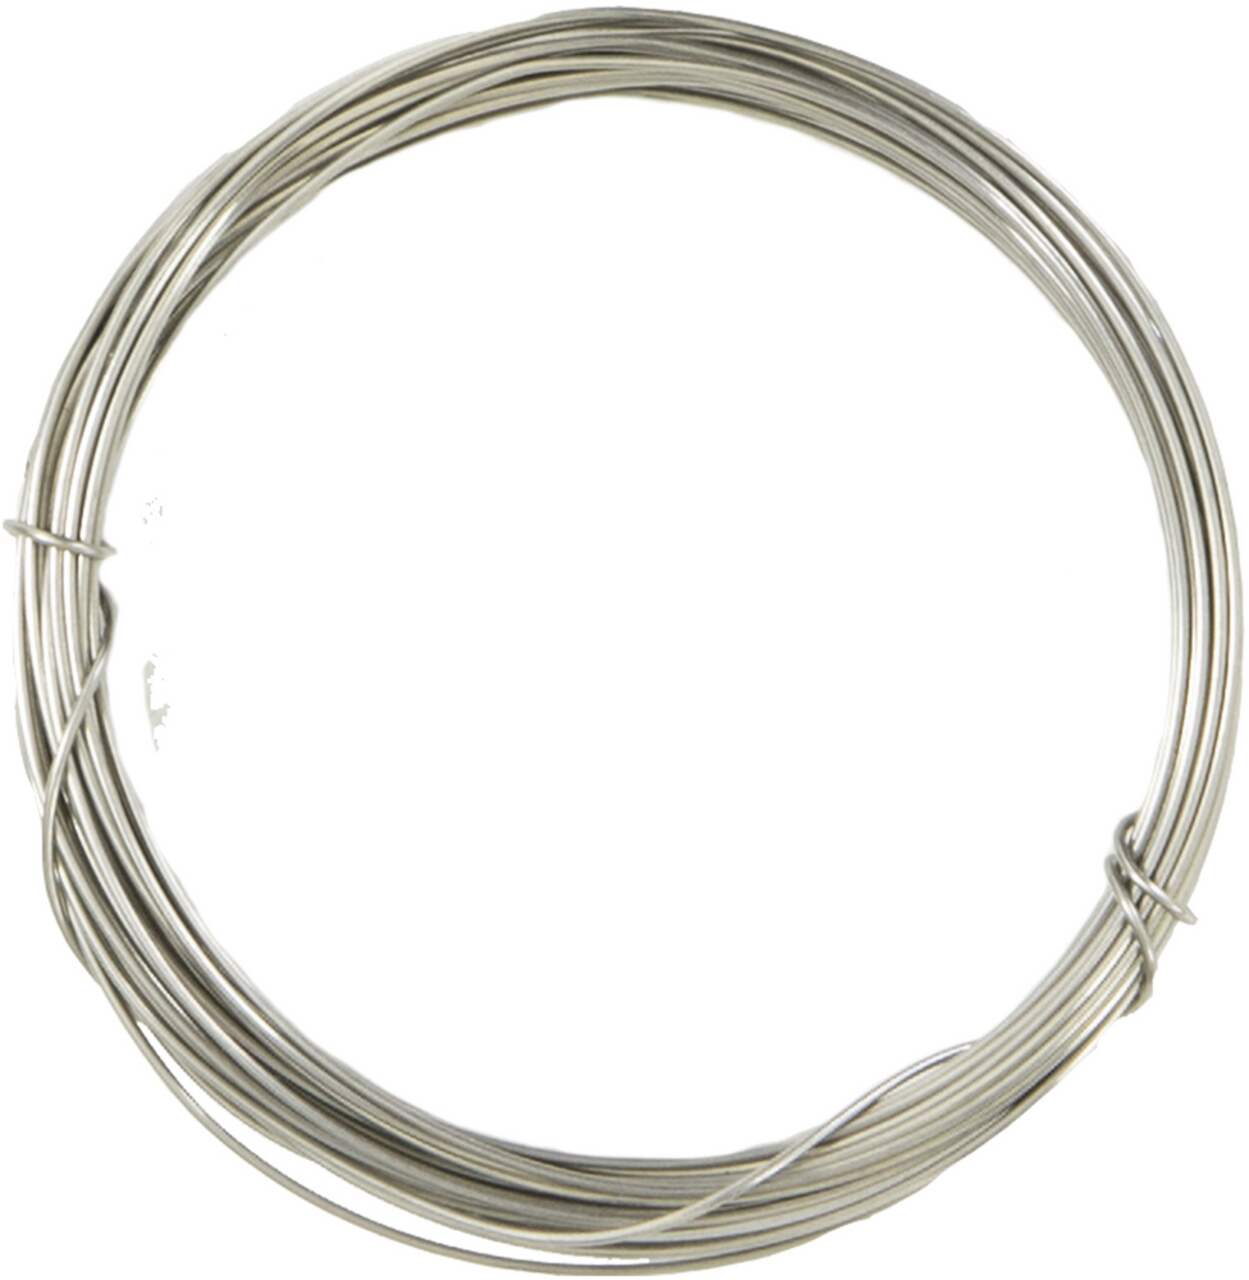 Stainless Steel 20 Gauge Wire | Canadian Tire